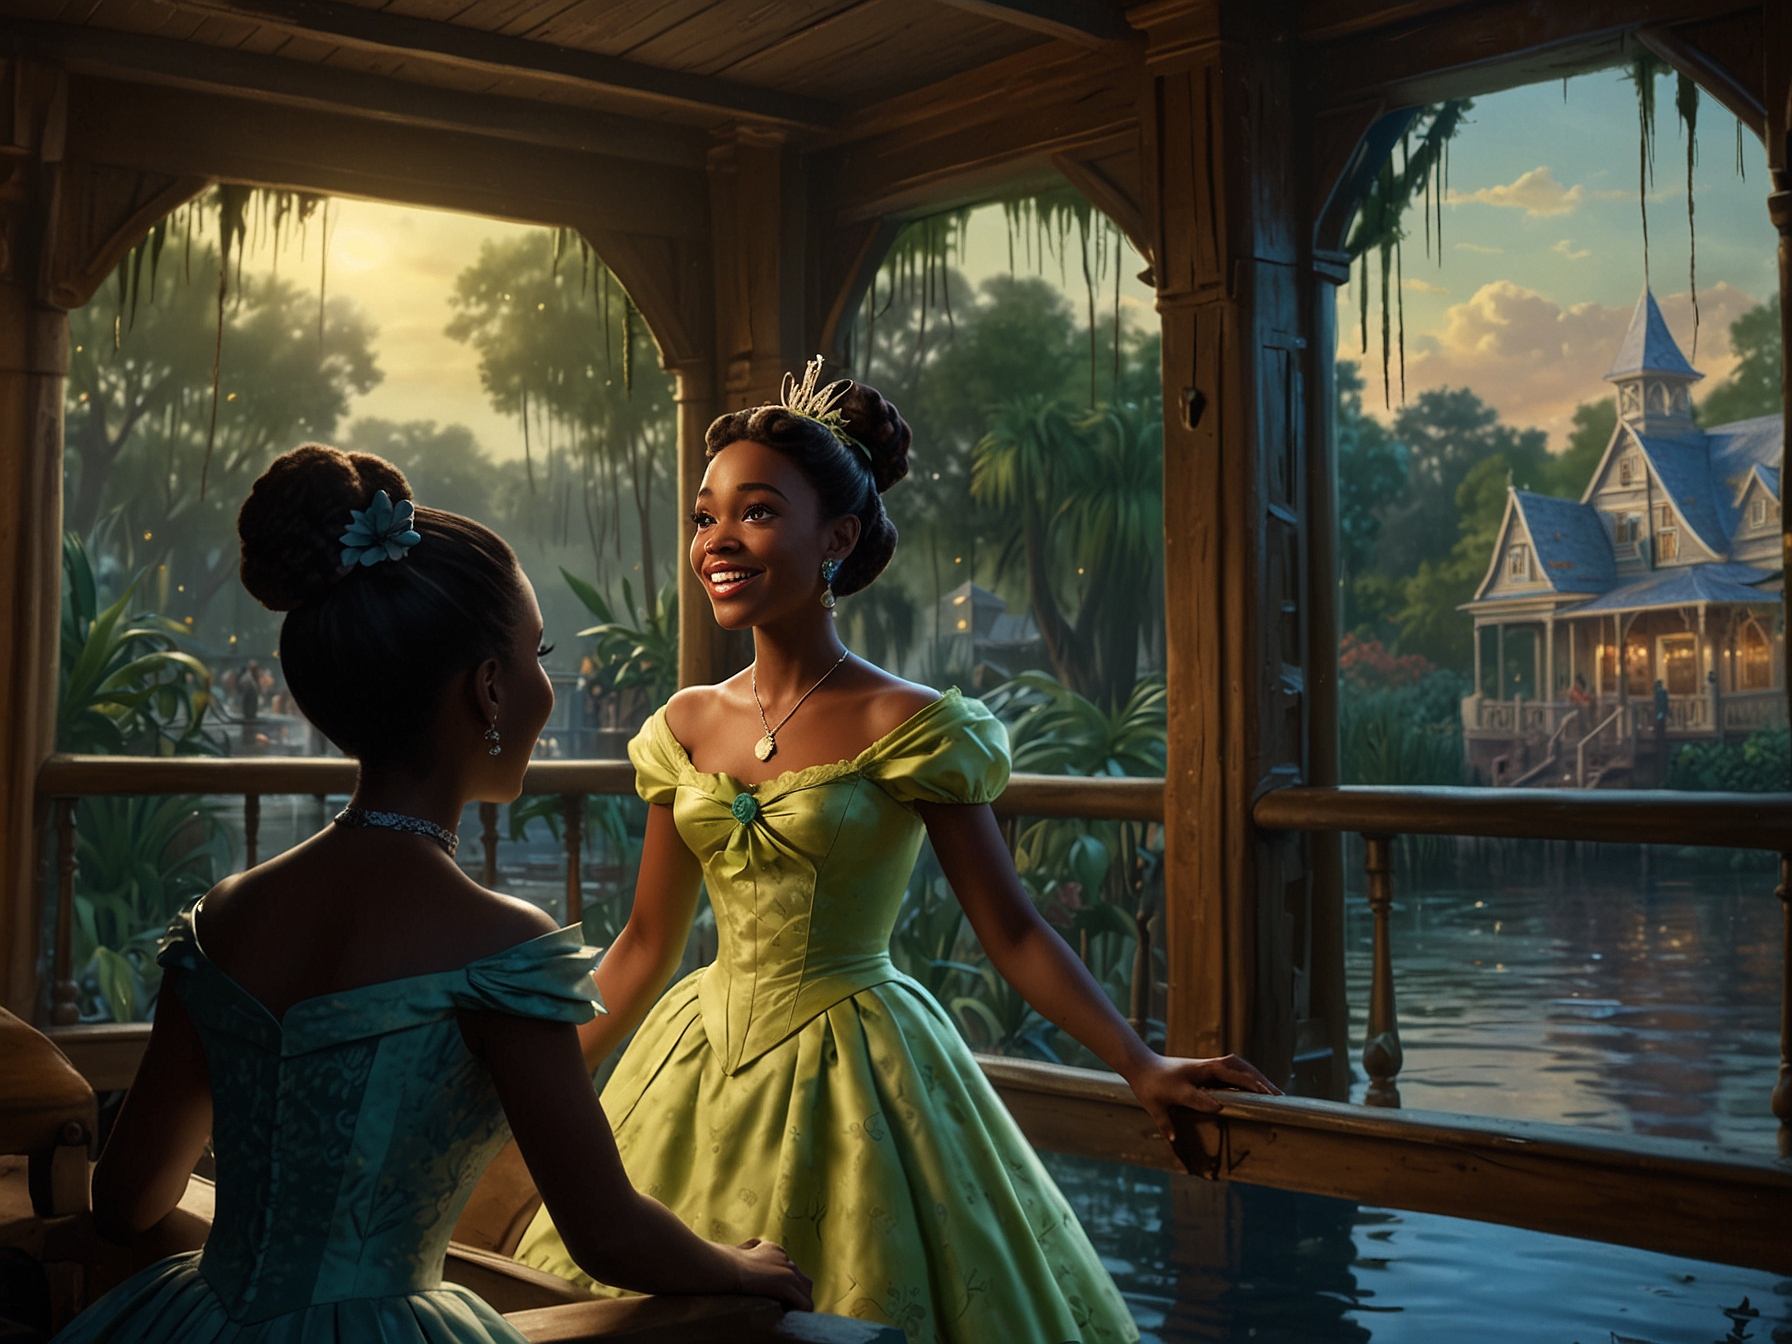 Guests aboard Tiana’s Bayou Adventure are immersed in a lively bayou environment, with detailed scenery, advanced animatronics, and lively music echoing from the film The Princess and the Frog.